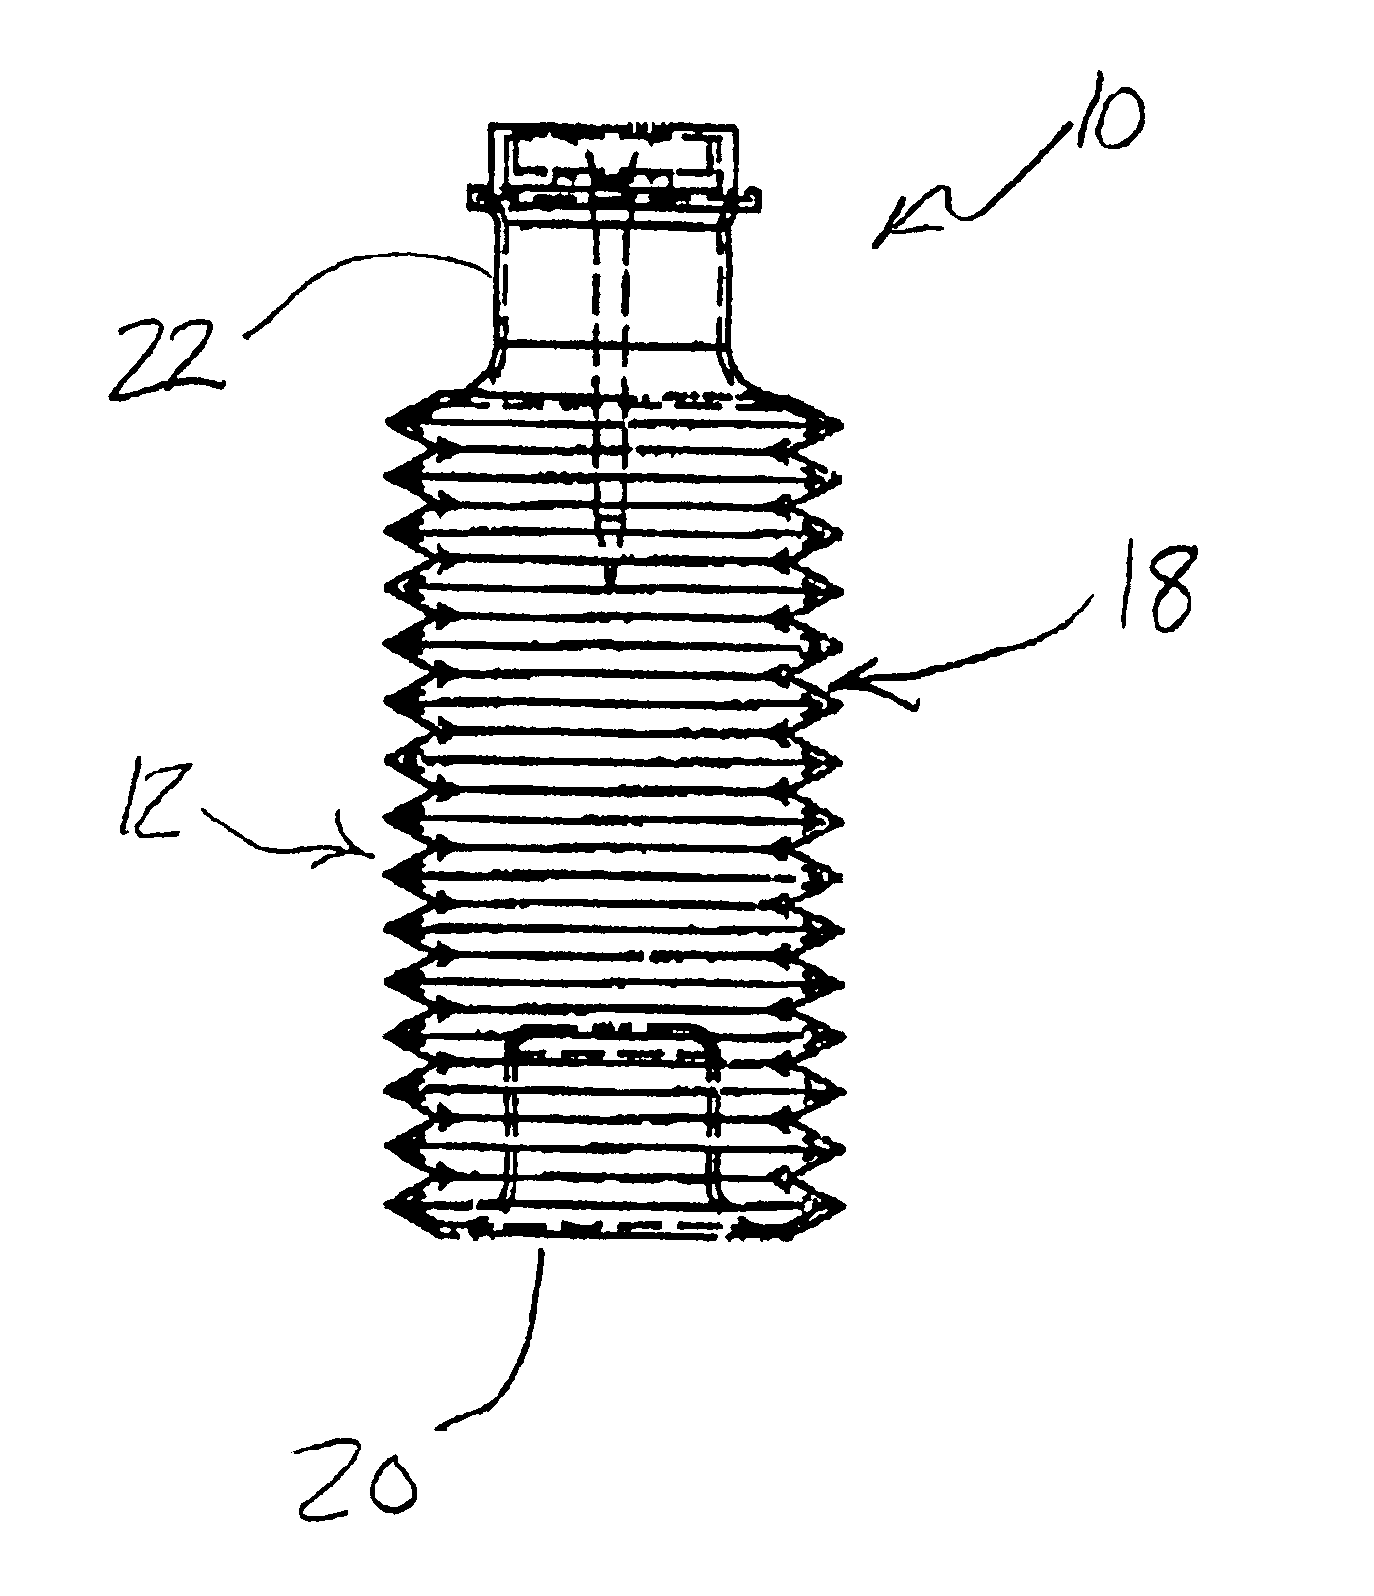 Convertible marinade container/dispenser having a flexibly compressible wall, and method of using same